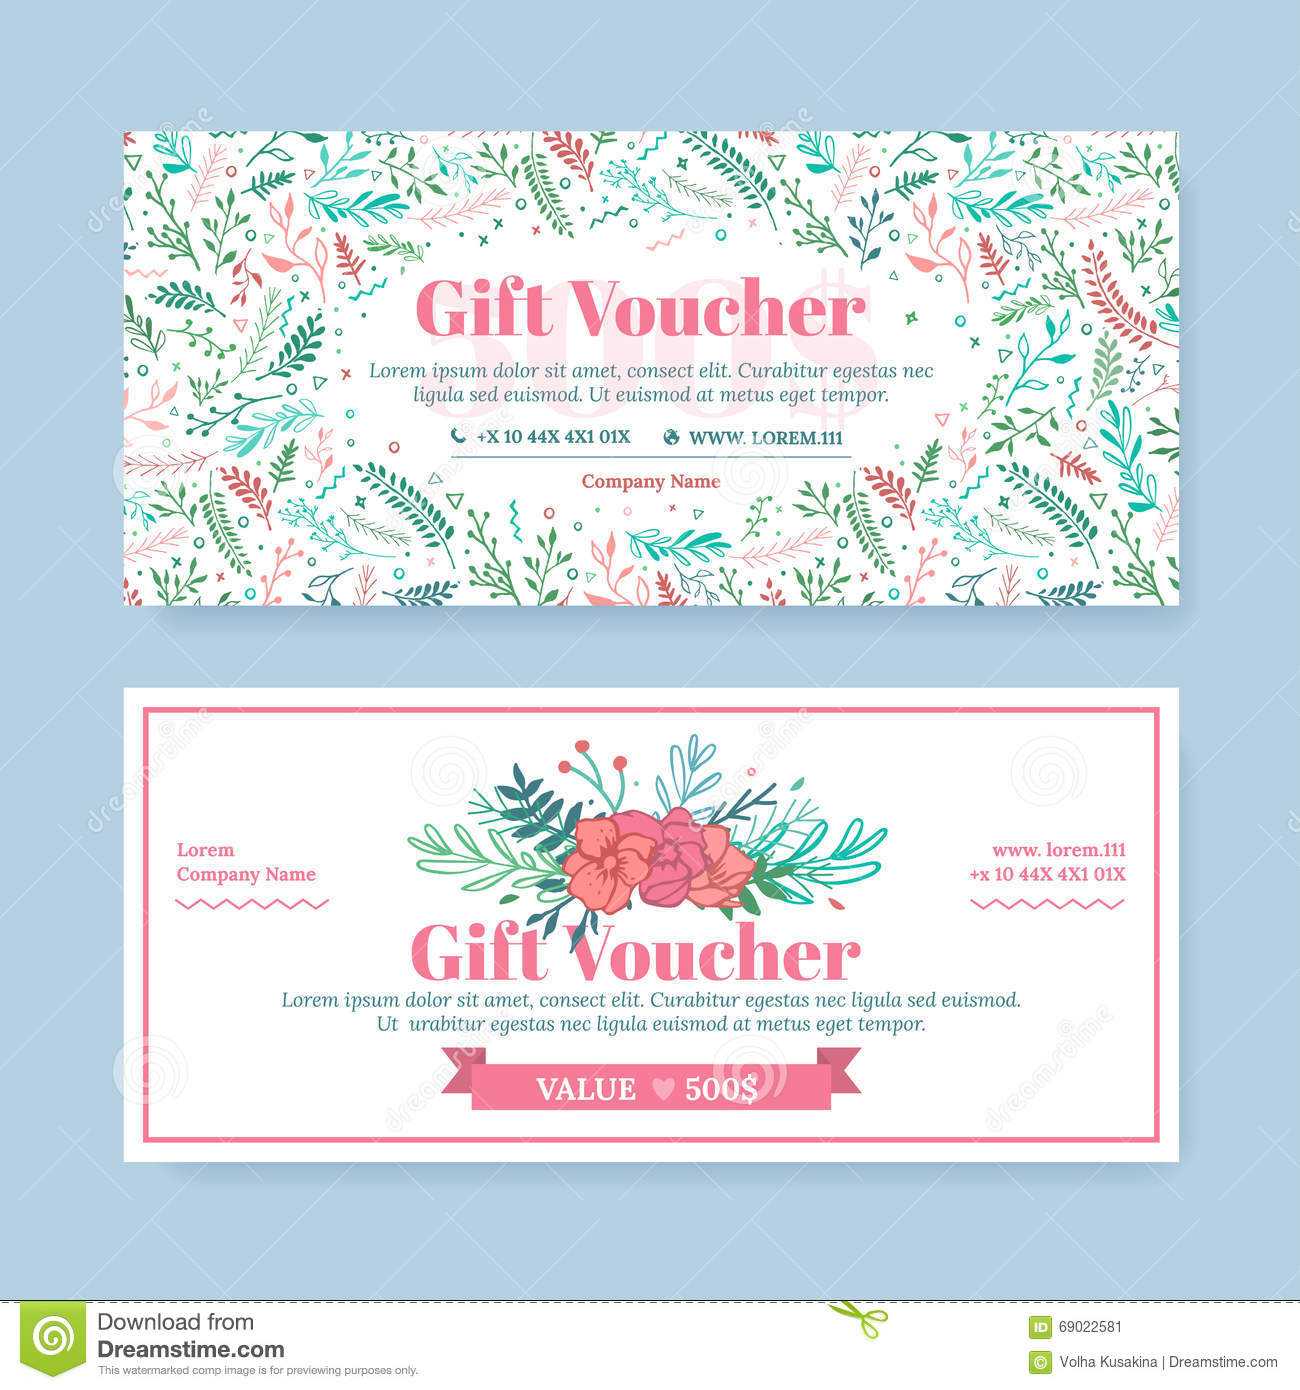 Free Downloadable Gift Certificate Templates ] – Free Inside Company Gift Certificate Template